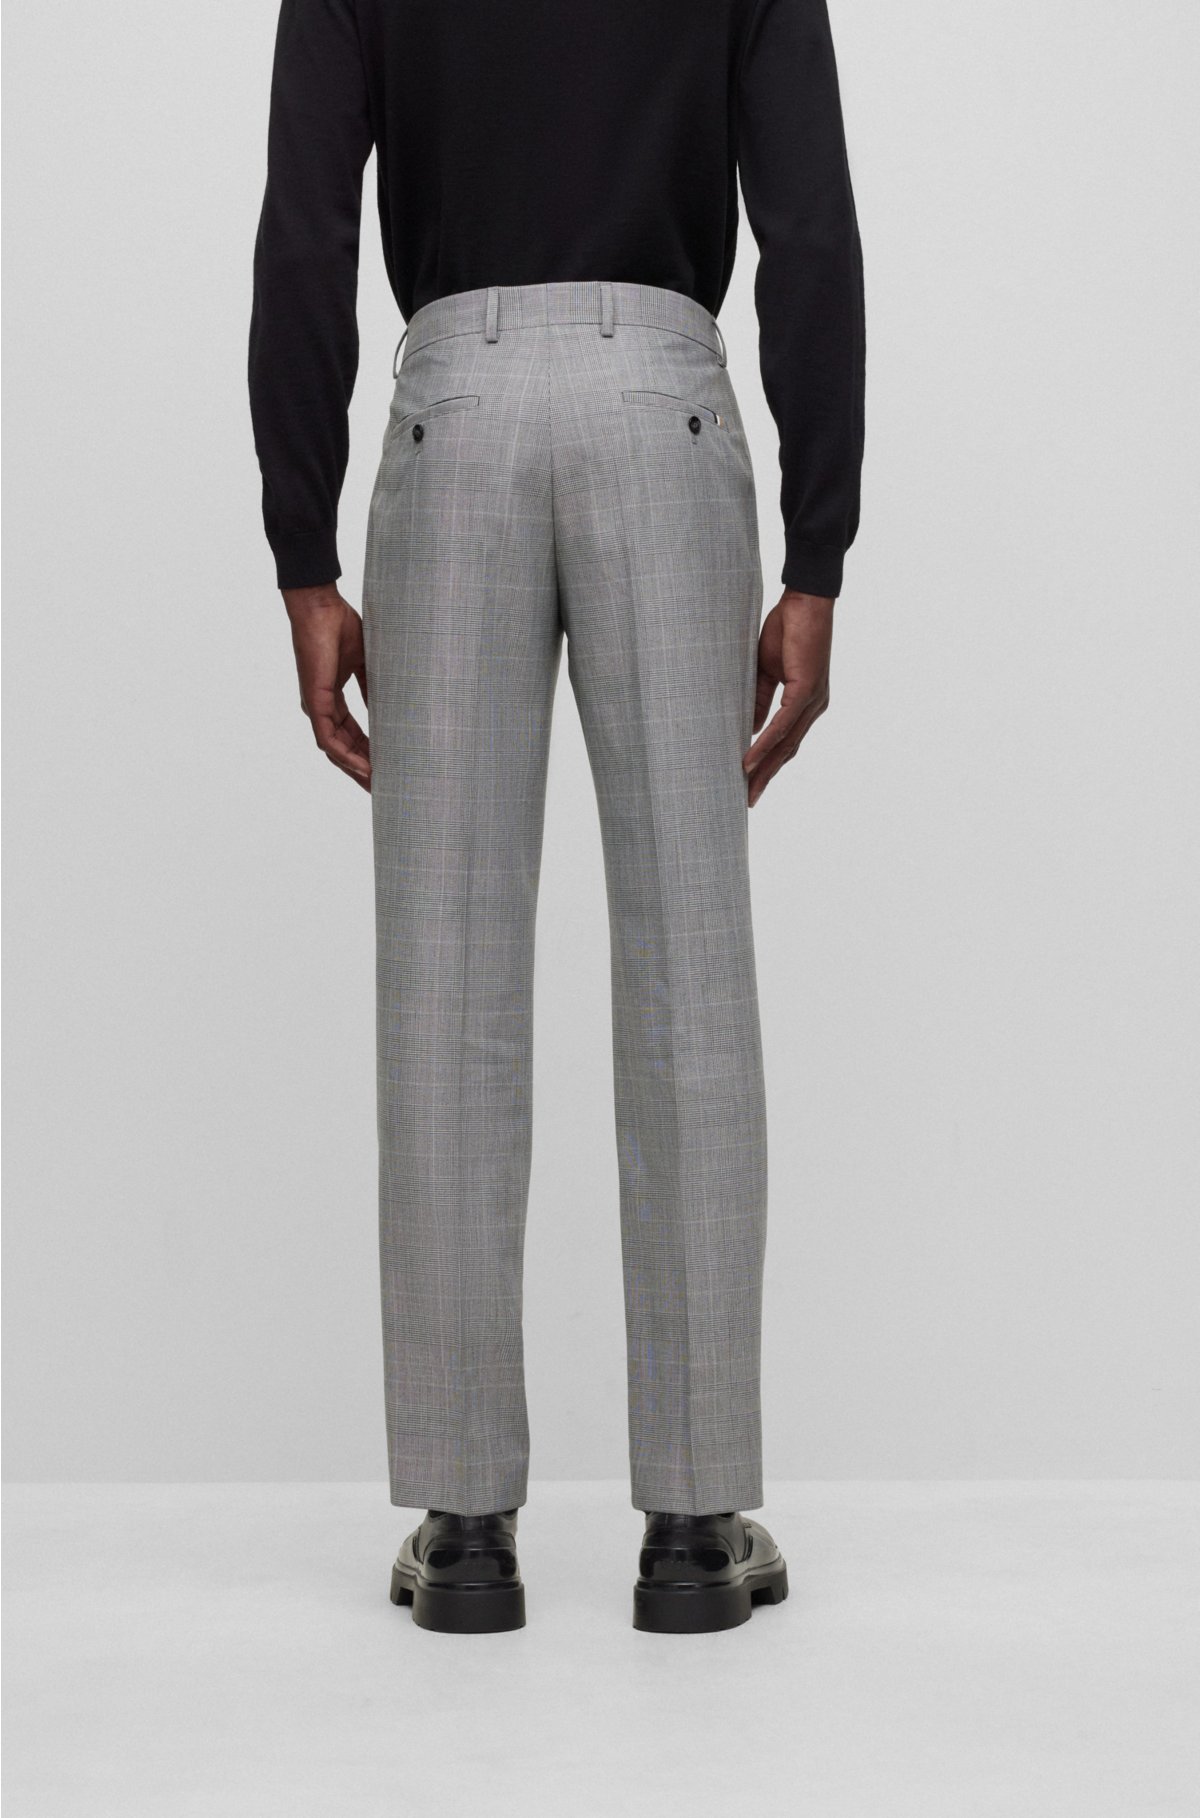 Slim-fit pants in checked crease-resistant fabric